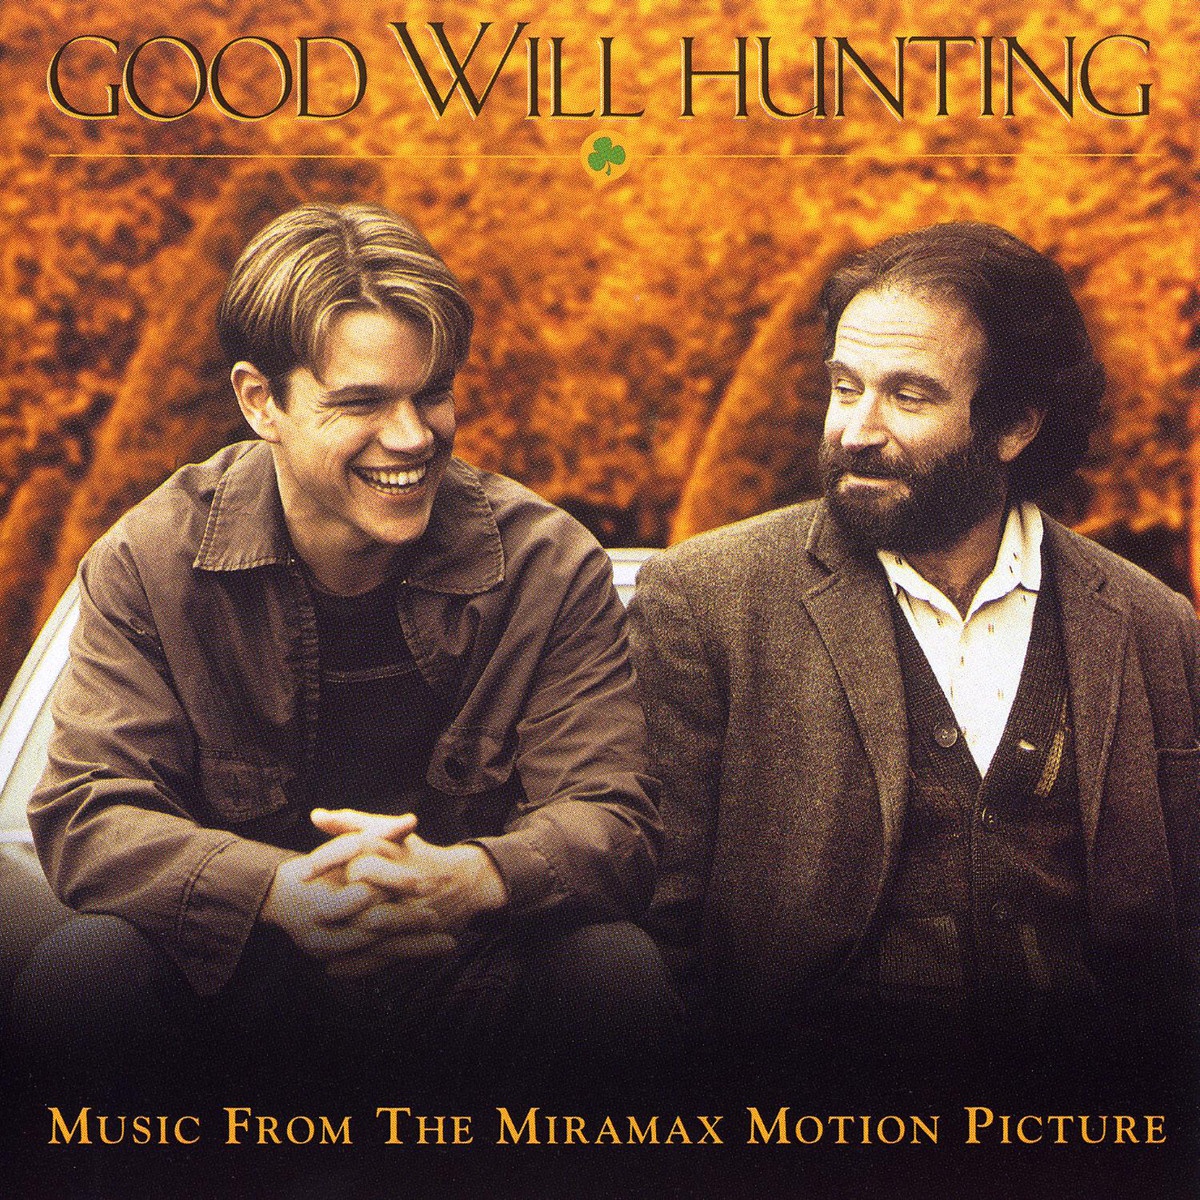 Good Will Hunting (Music from the Miramax Motion Picture)